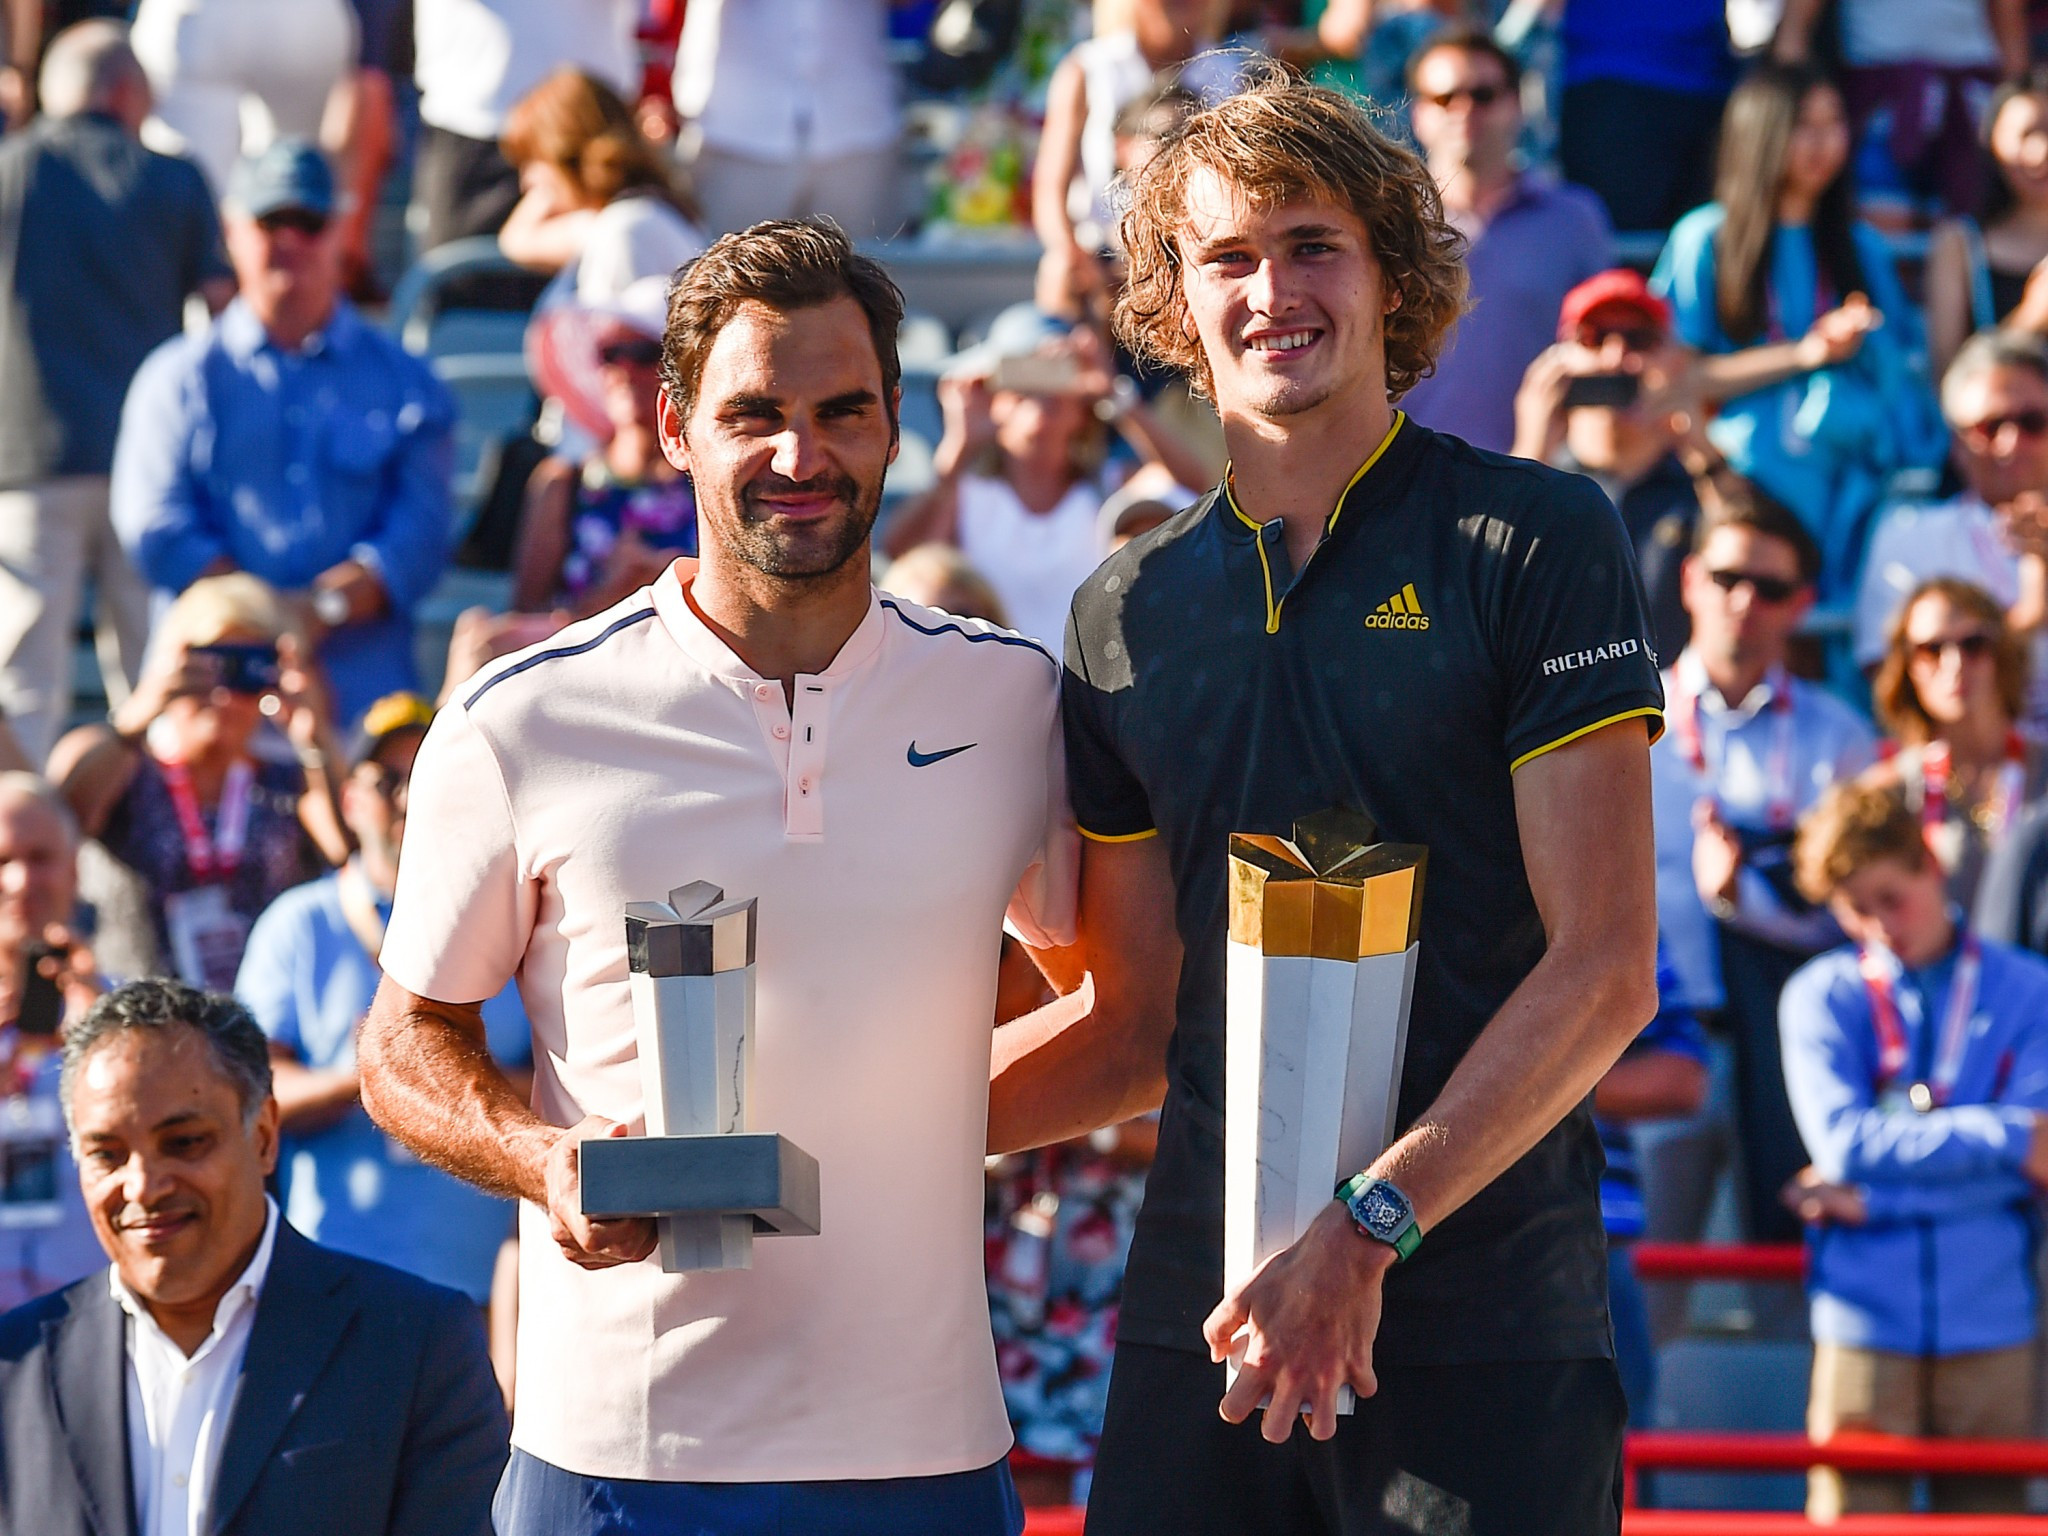 Alexander Zverev stunned Roger Federer to win the Rogers Cup ©Getty Images